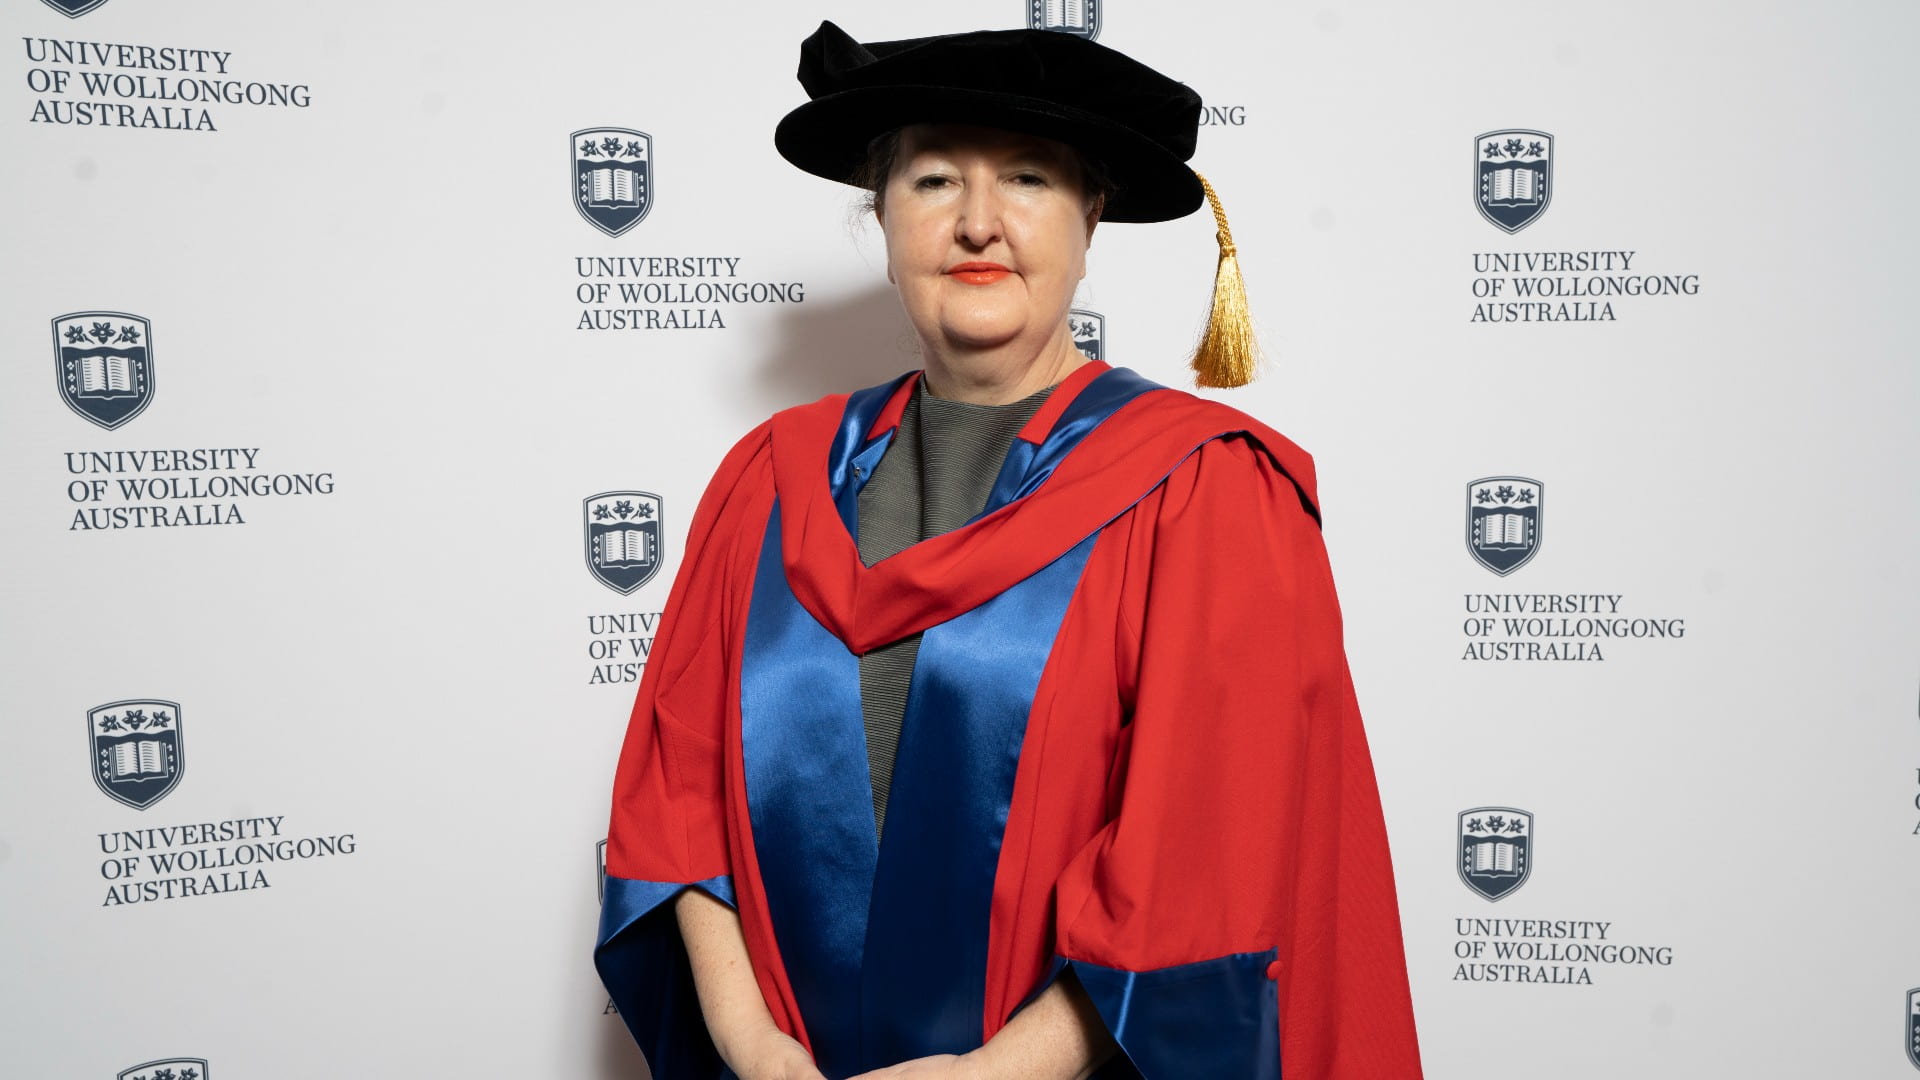 Dr Lisa Havilah, wearing a black graduation cap and blue and red graduation gown, stands in front of a UOW wall. Photo: Paul Jones